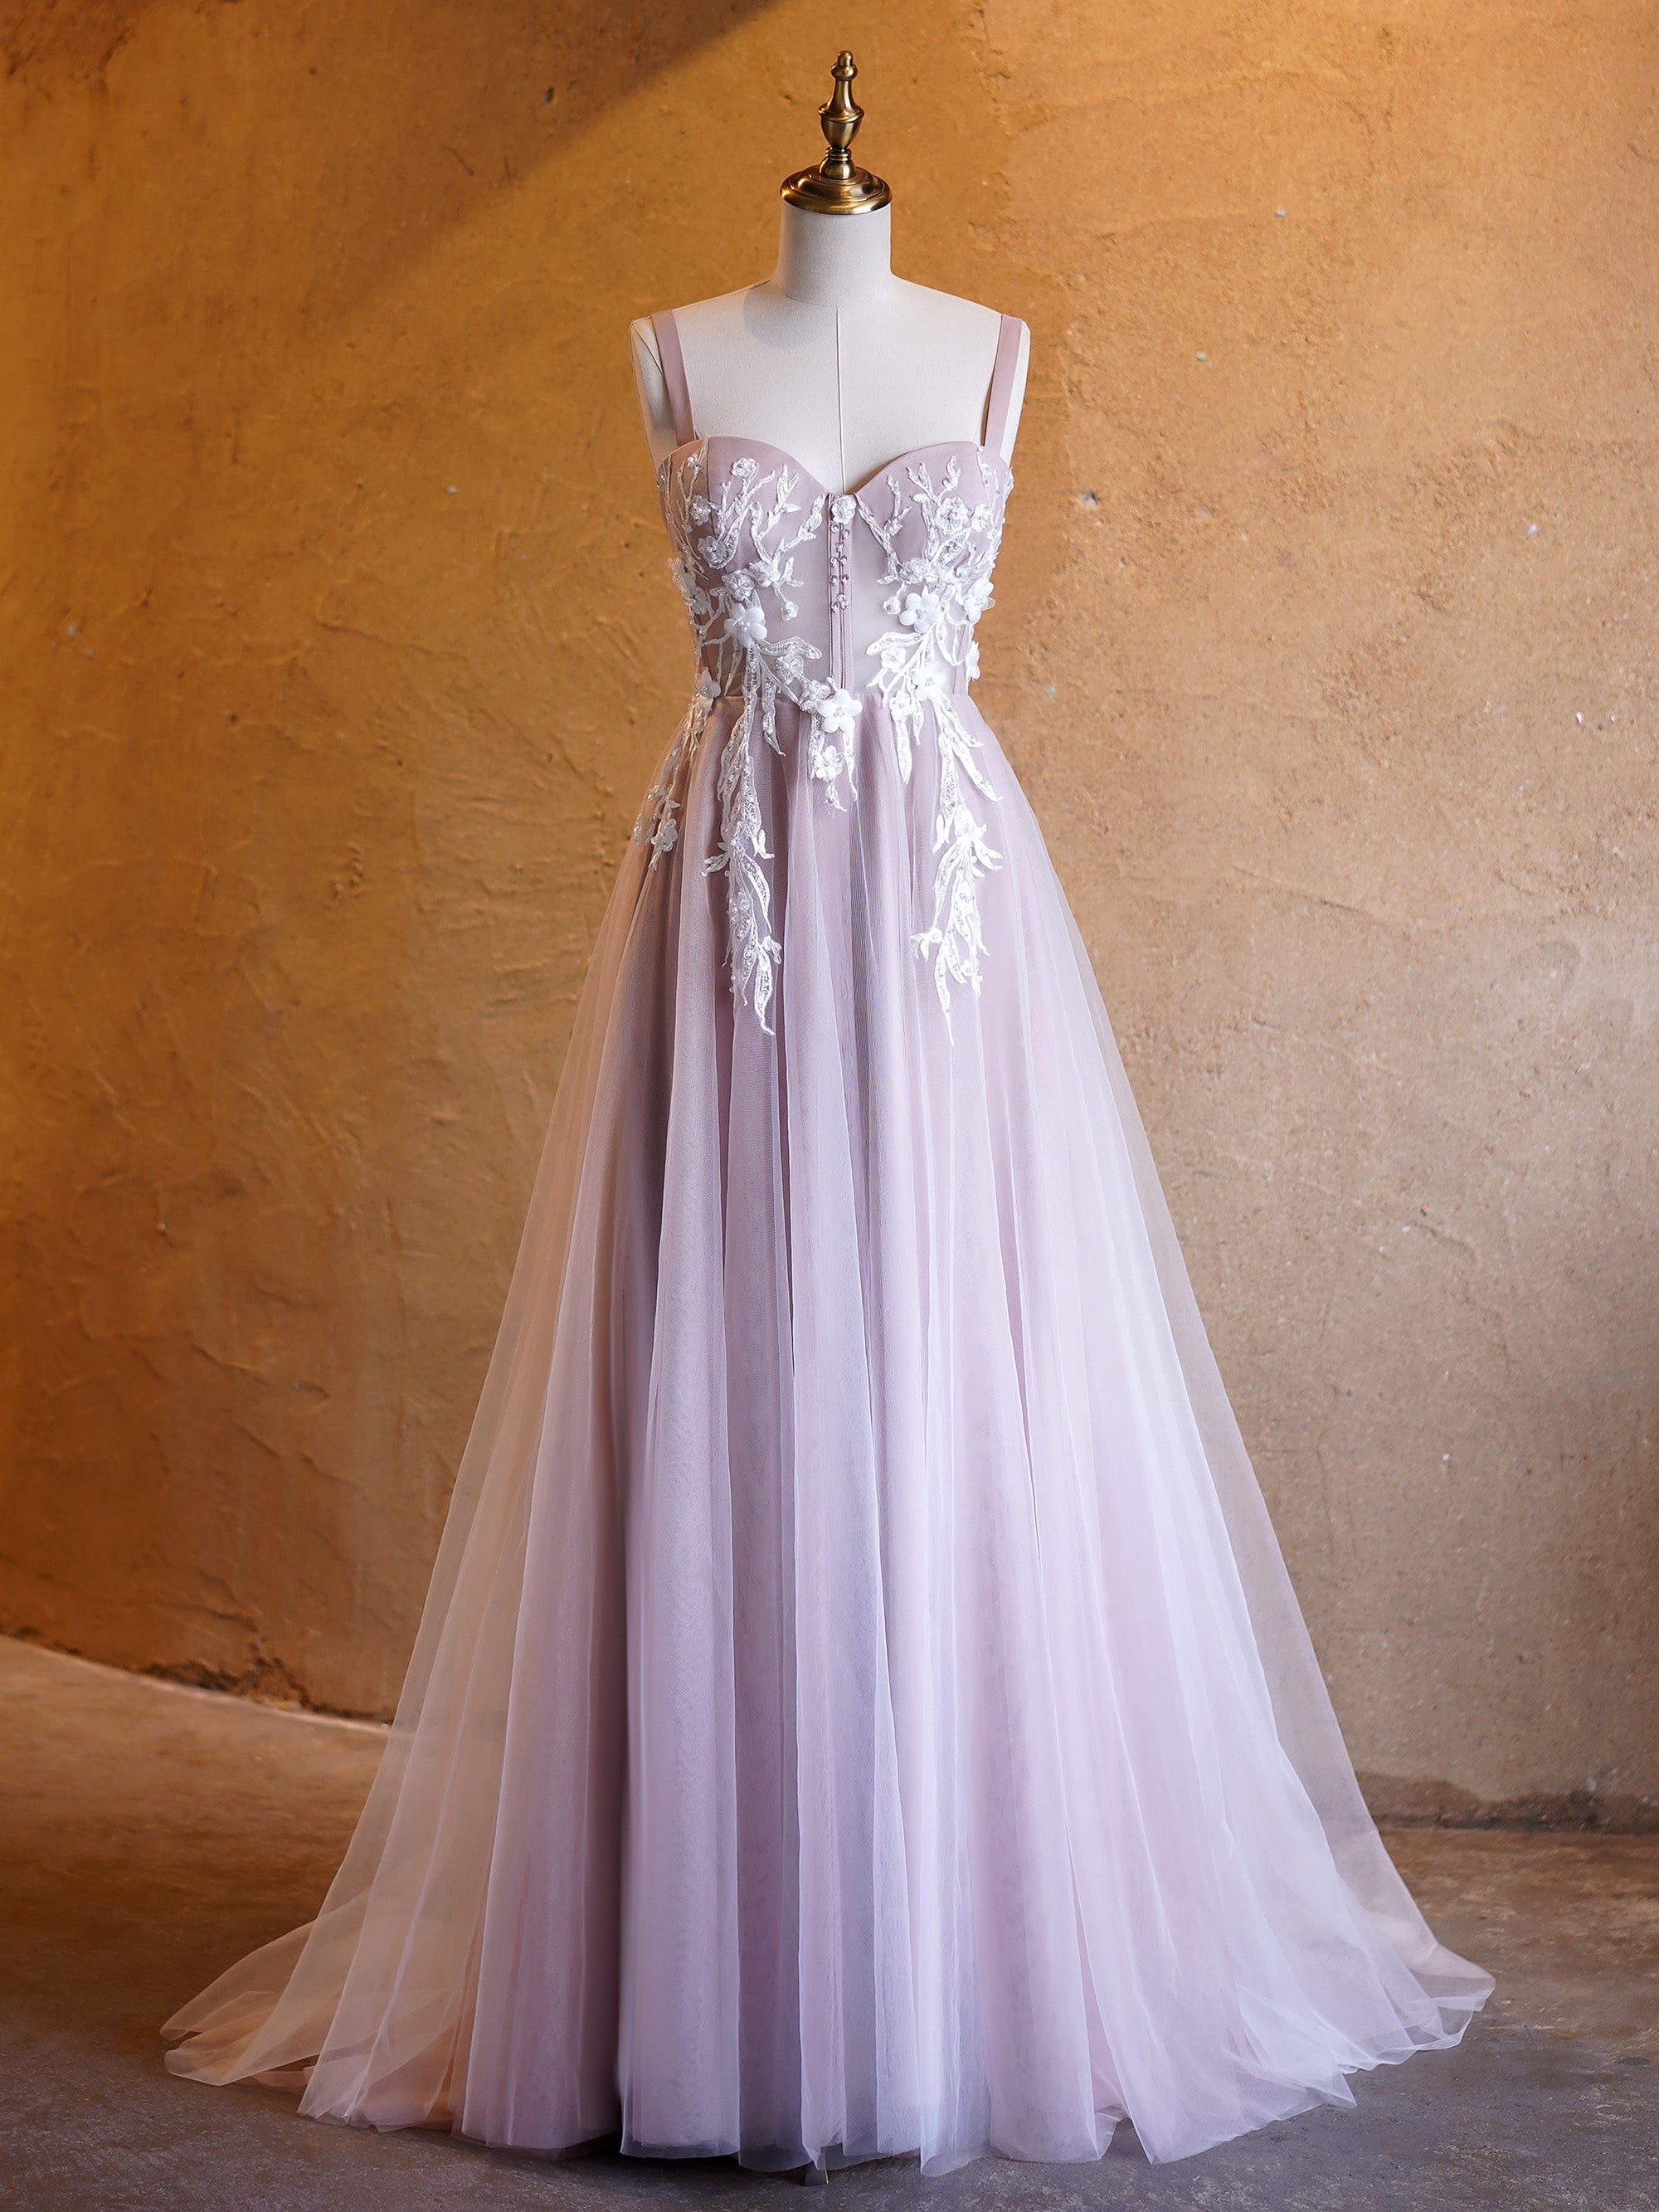 Cute Tiered Lavender Tulle Sweetheart Corset Prom Dress - VQ